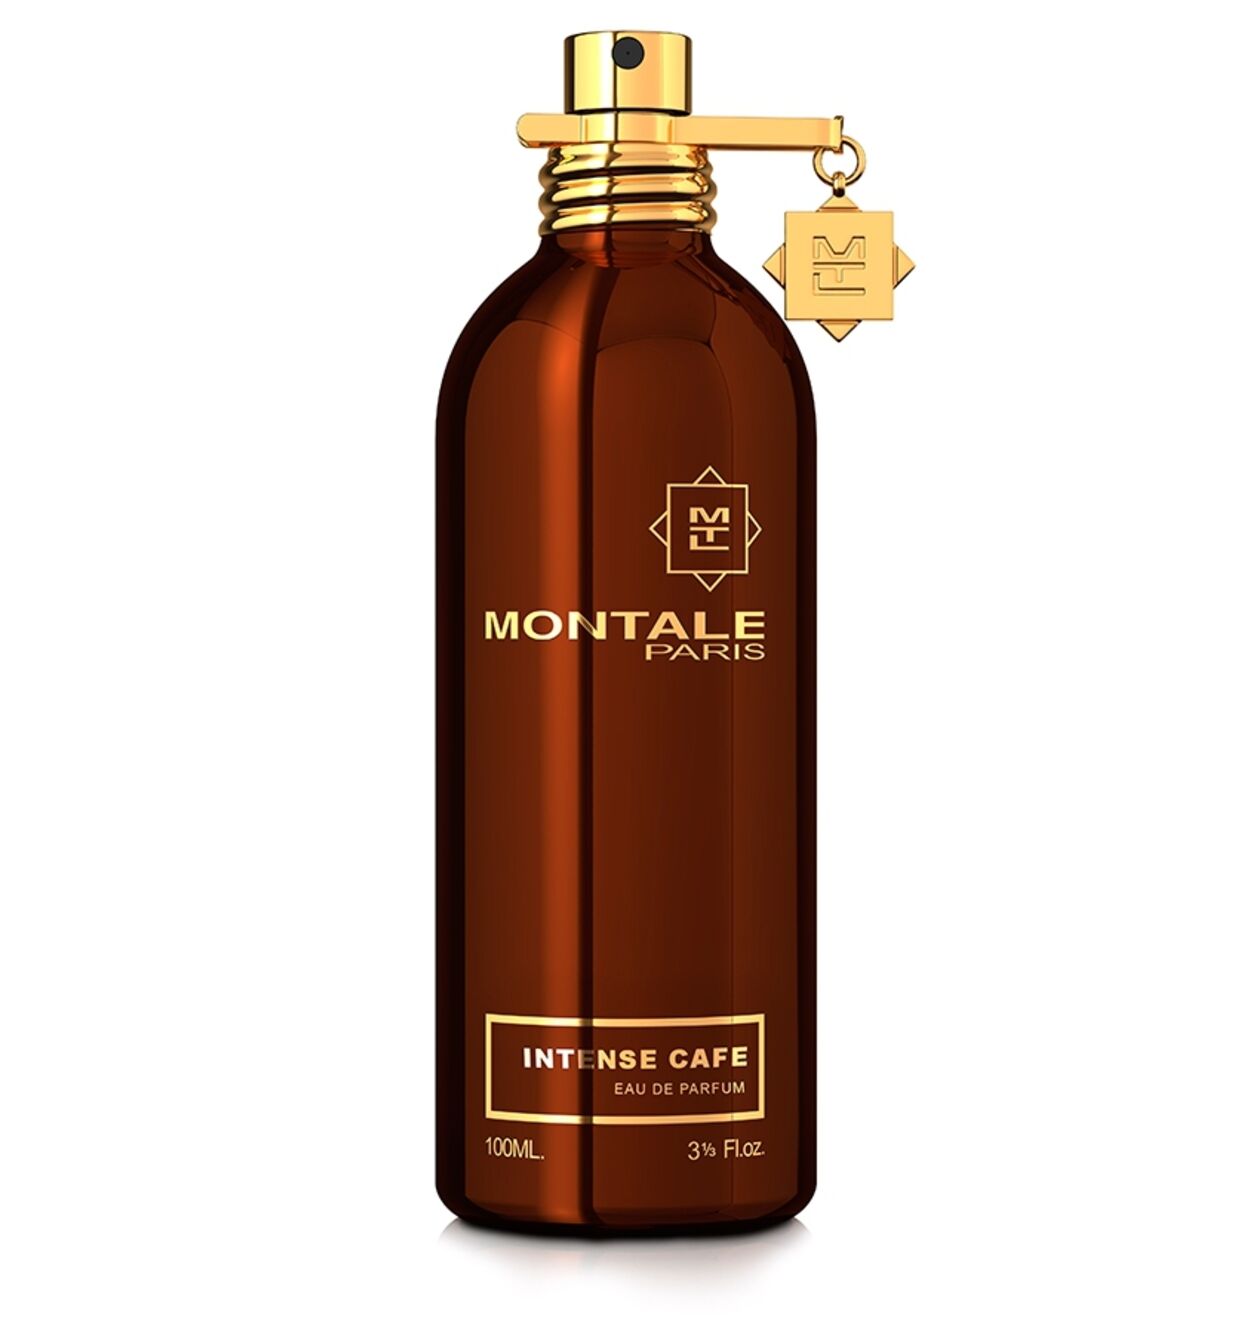 Montale basilic. Духи Монталь intense Cafe. Montale Aoud Forest 50ml. Парфюмерная вода intense Cafe Montale 100 ml. Montale "Aoud Forest" 100 ml.